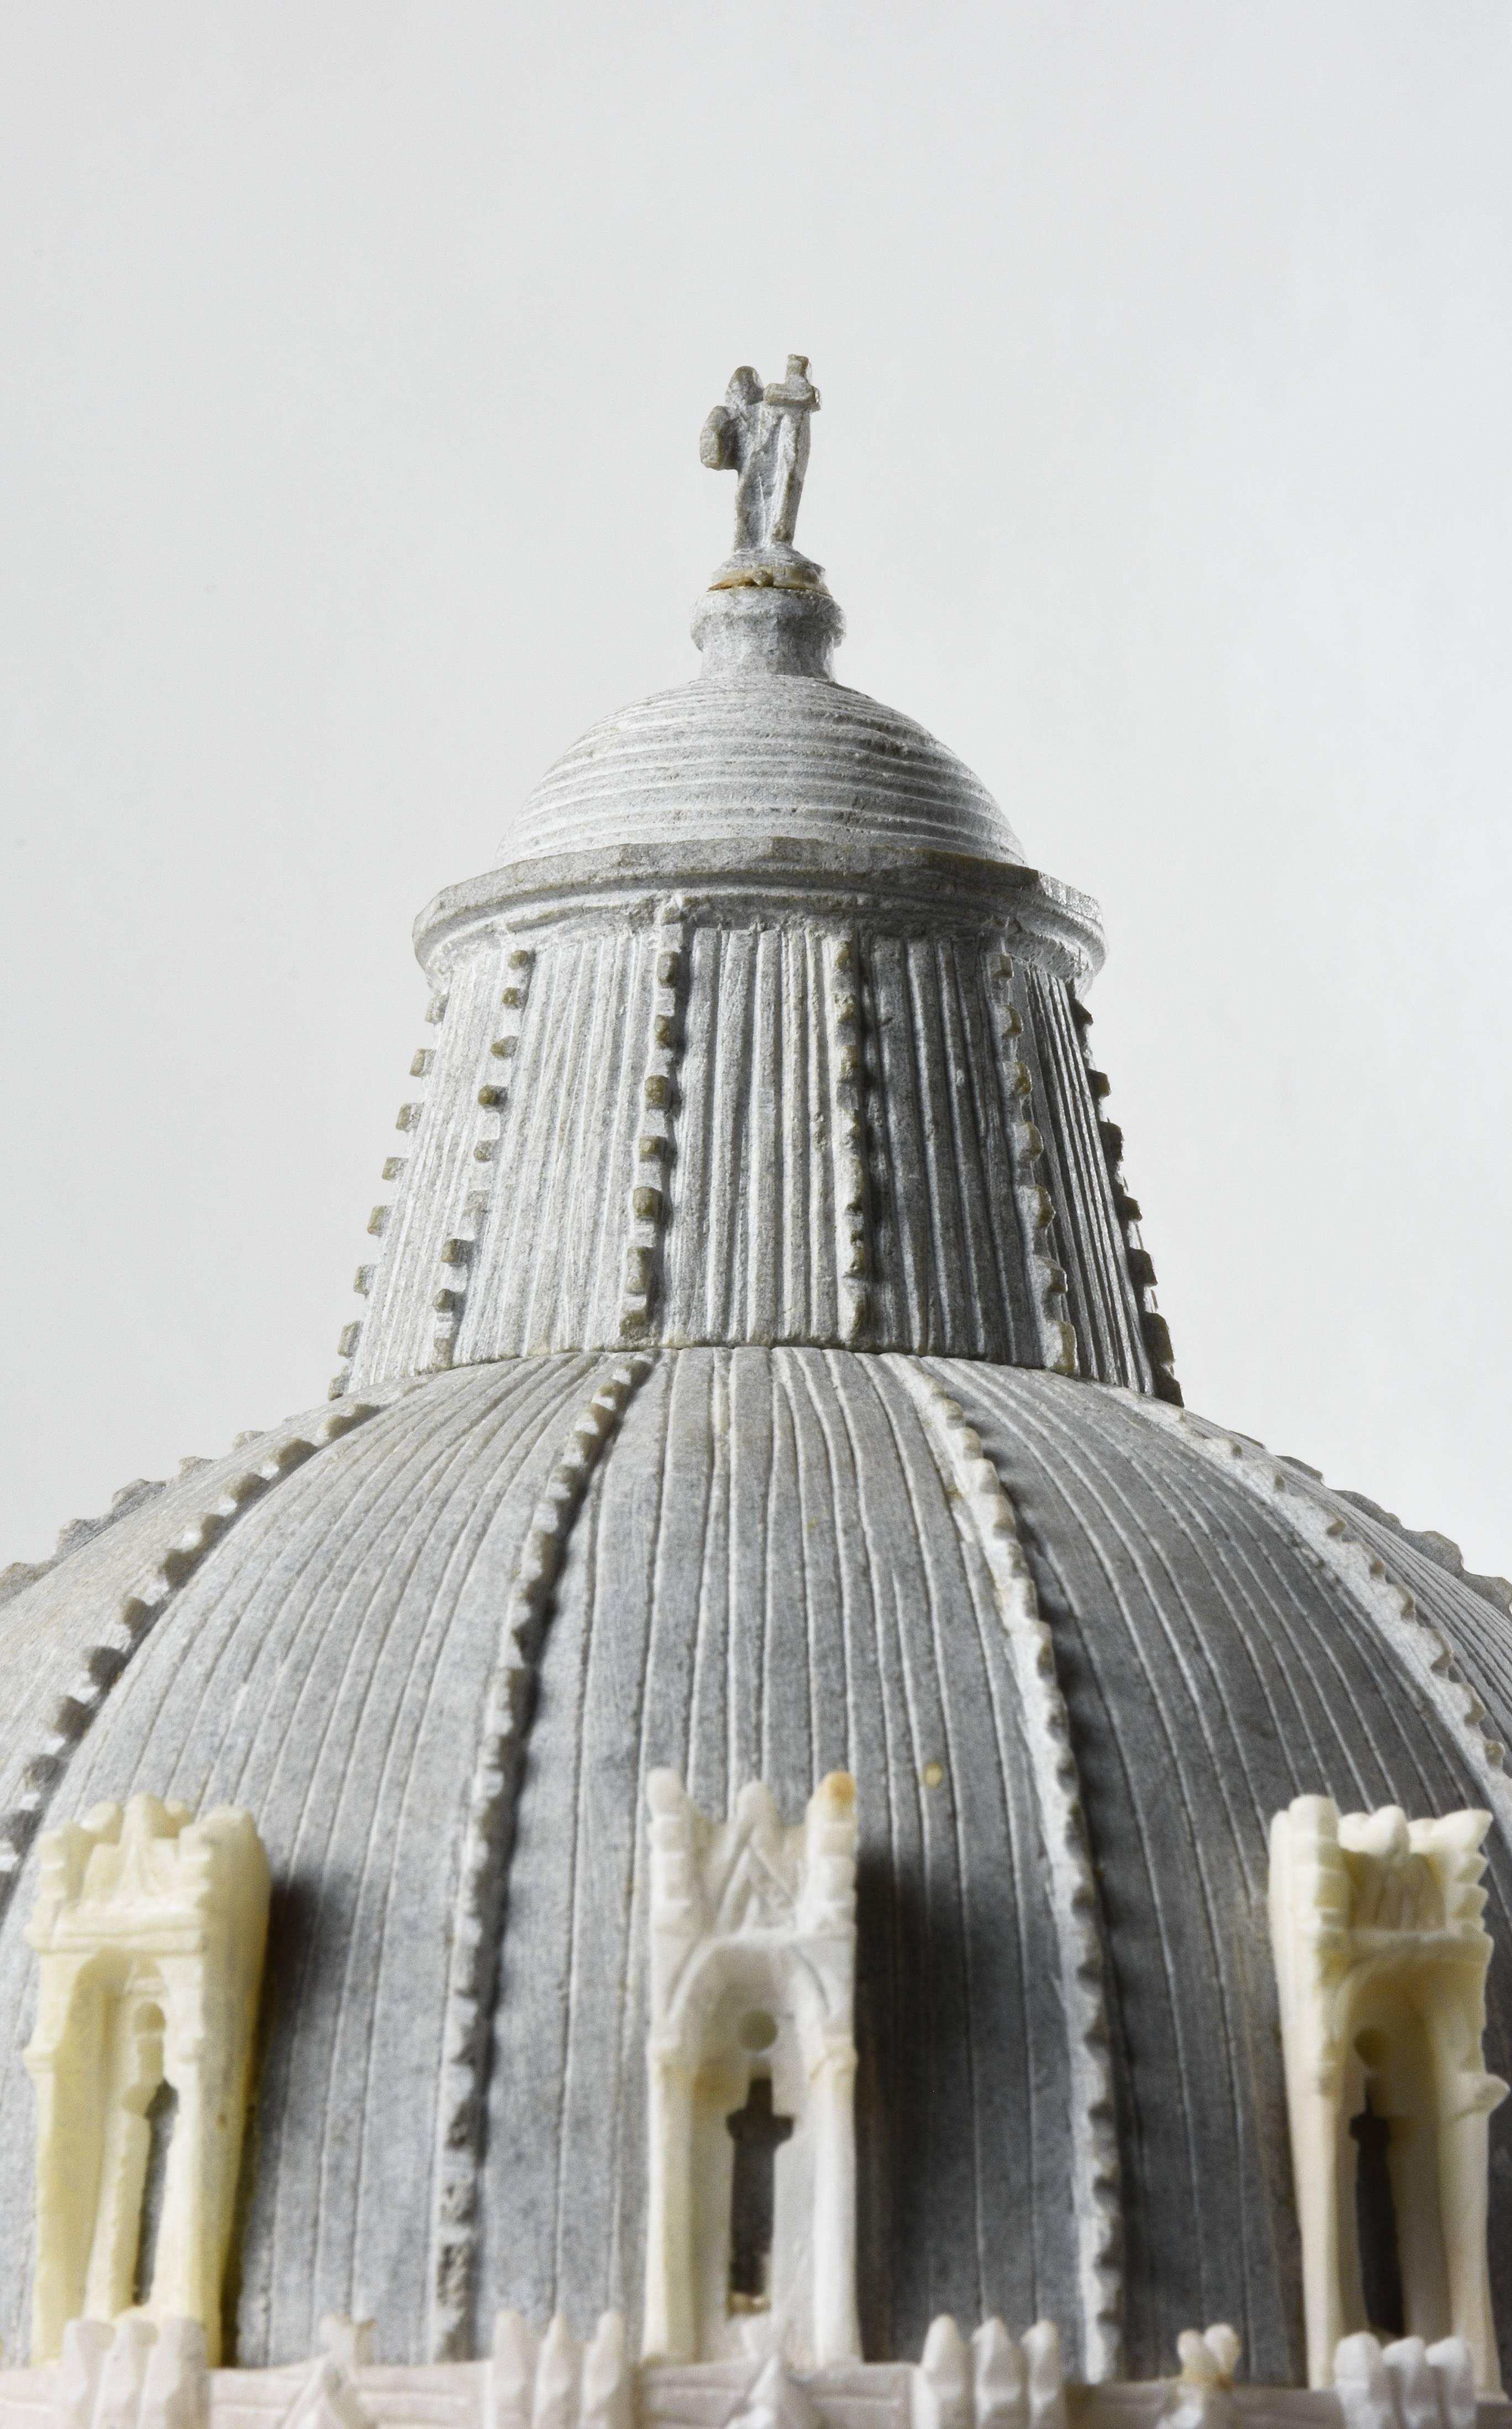 Mid-19th Century Spectacular Grand Tour Architectural Model of Pisa's Baptistry with Glass Dome